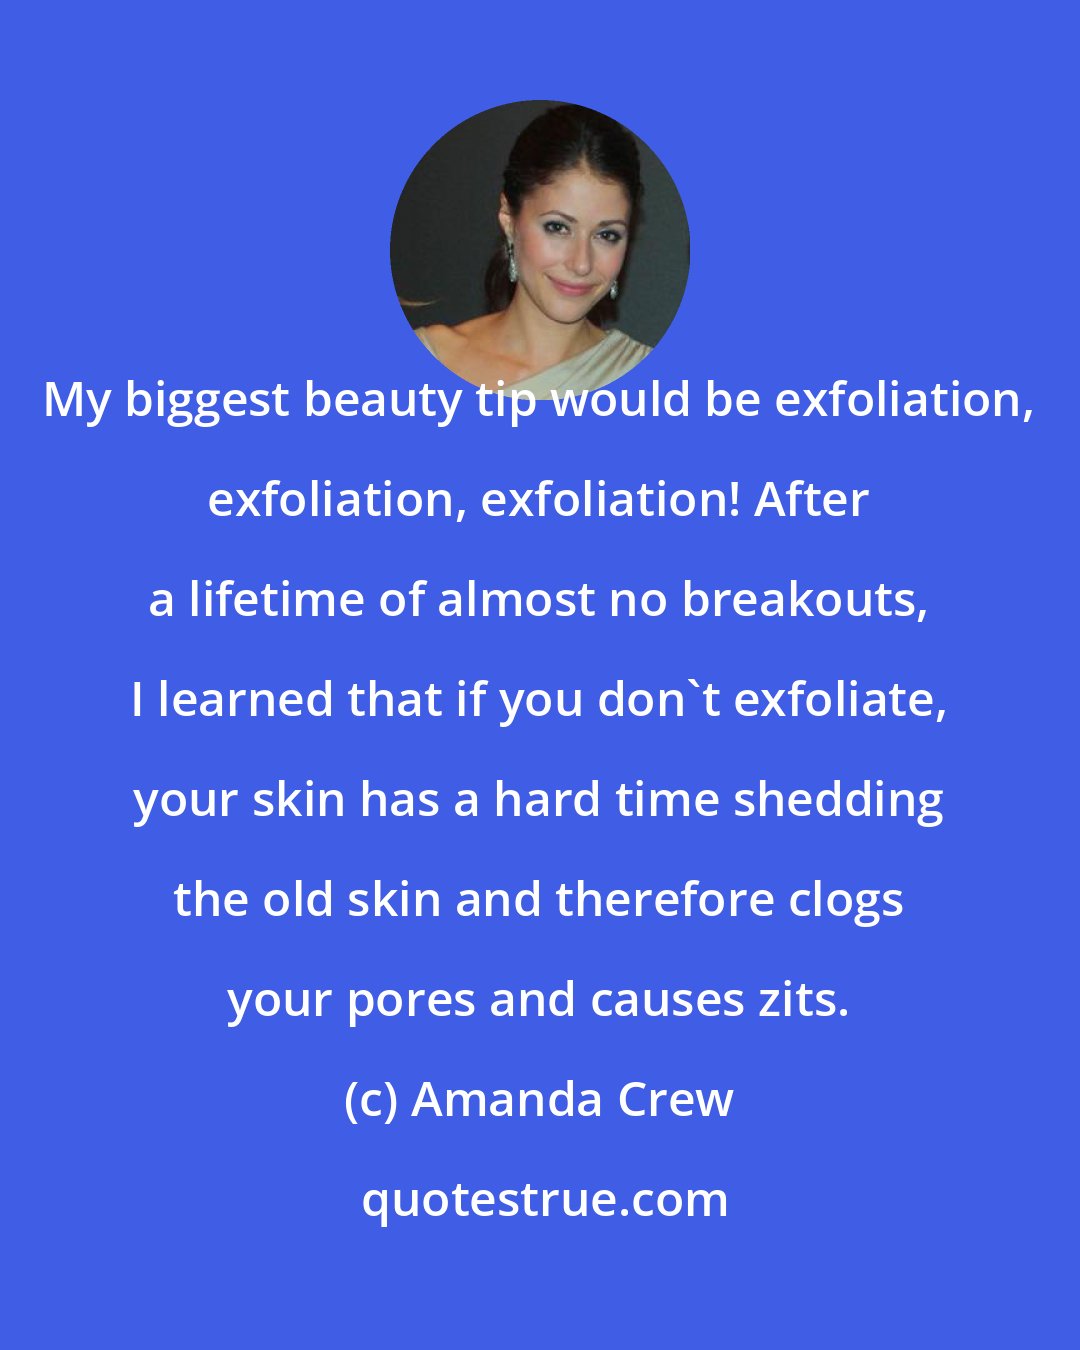 Amanda Crew: My biggest beauty tip would be exfoliation, exfoliation, exfoliation! After a lifetime of almost no breakouts, I learned that if you don't exfoliate, your skin has a hard time shedding the old skin and therefore clogs your pores and causes zits.